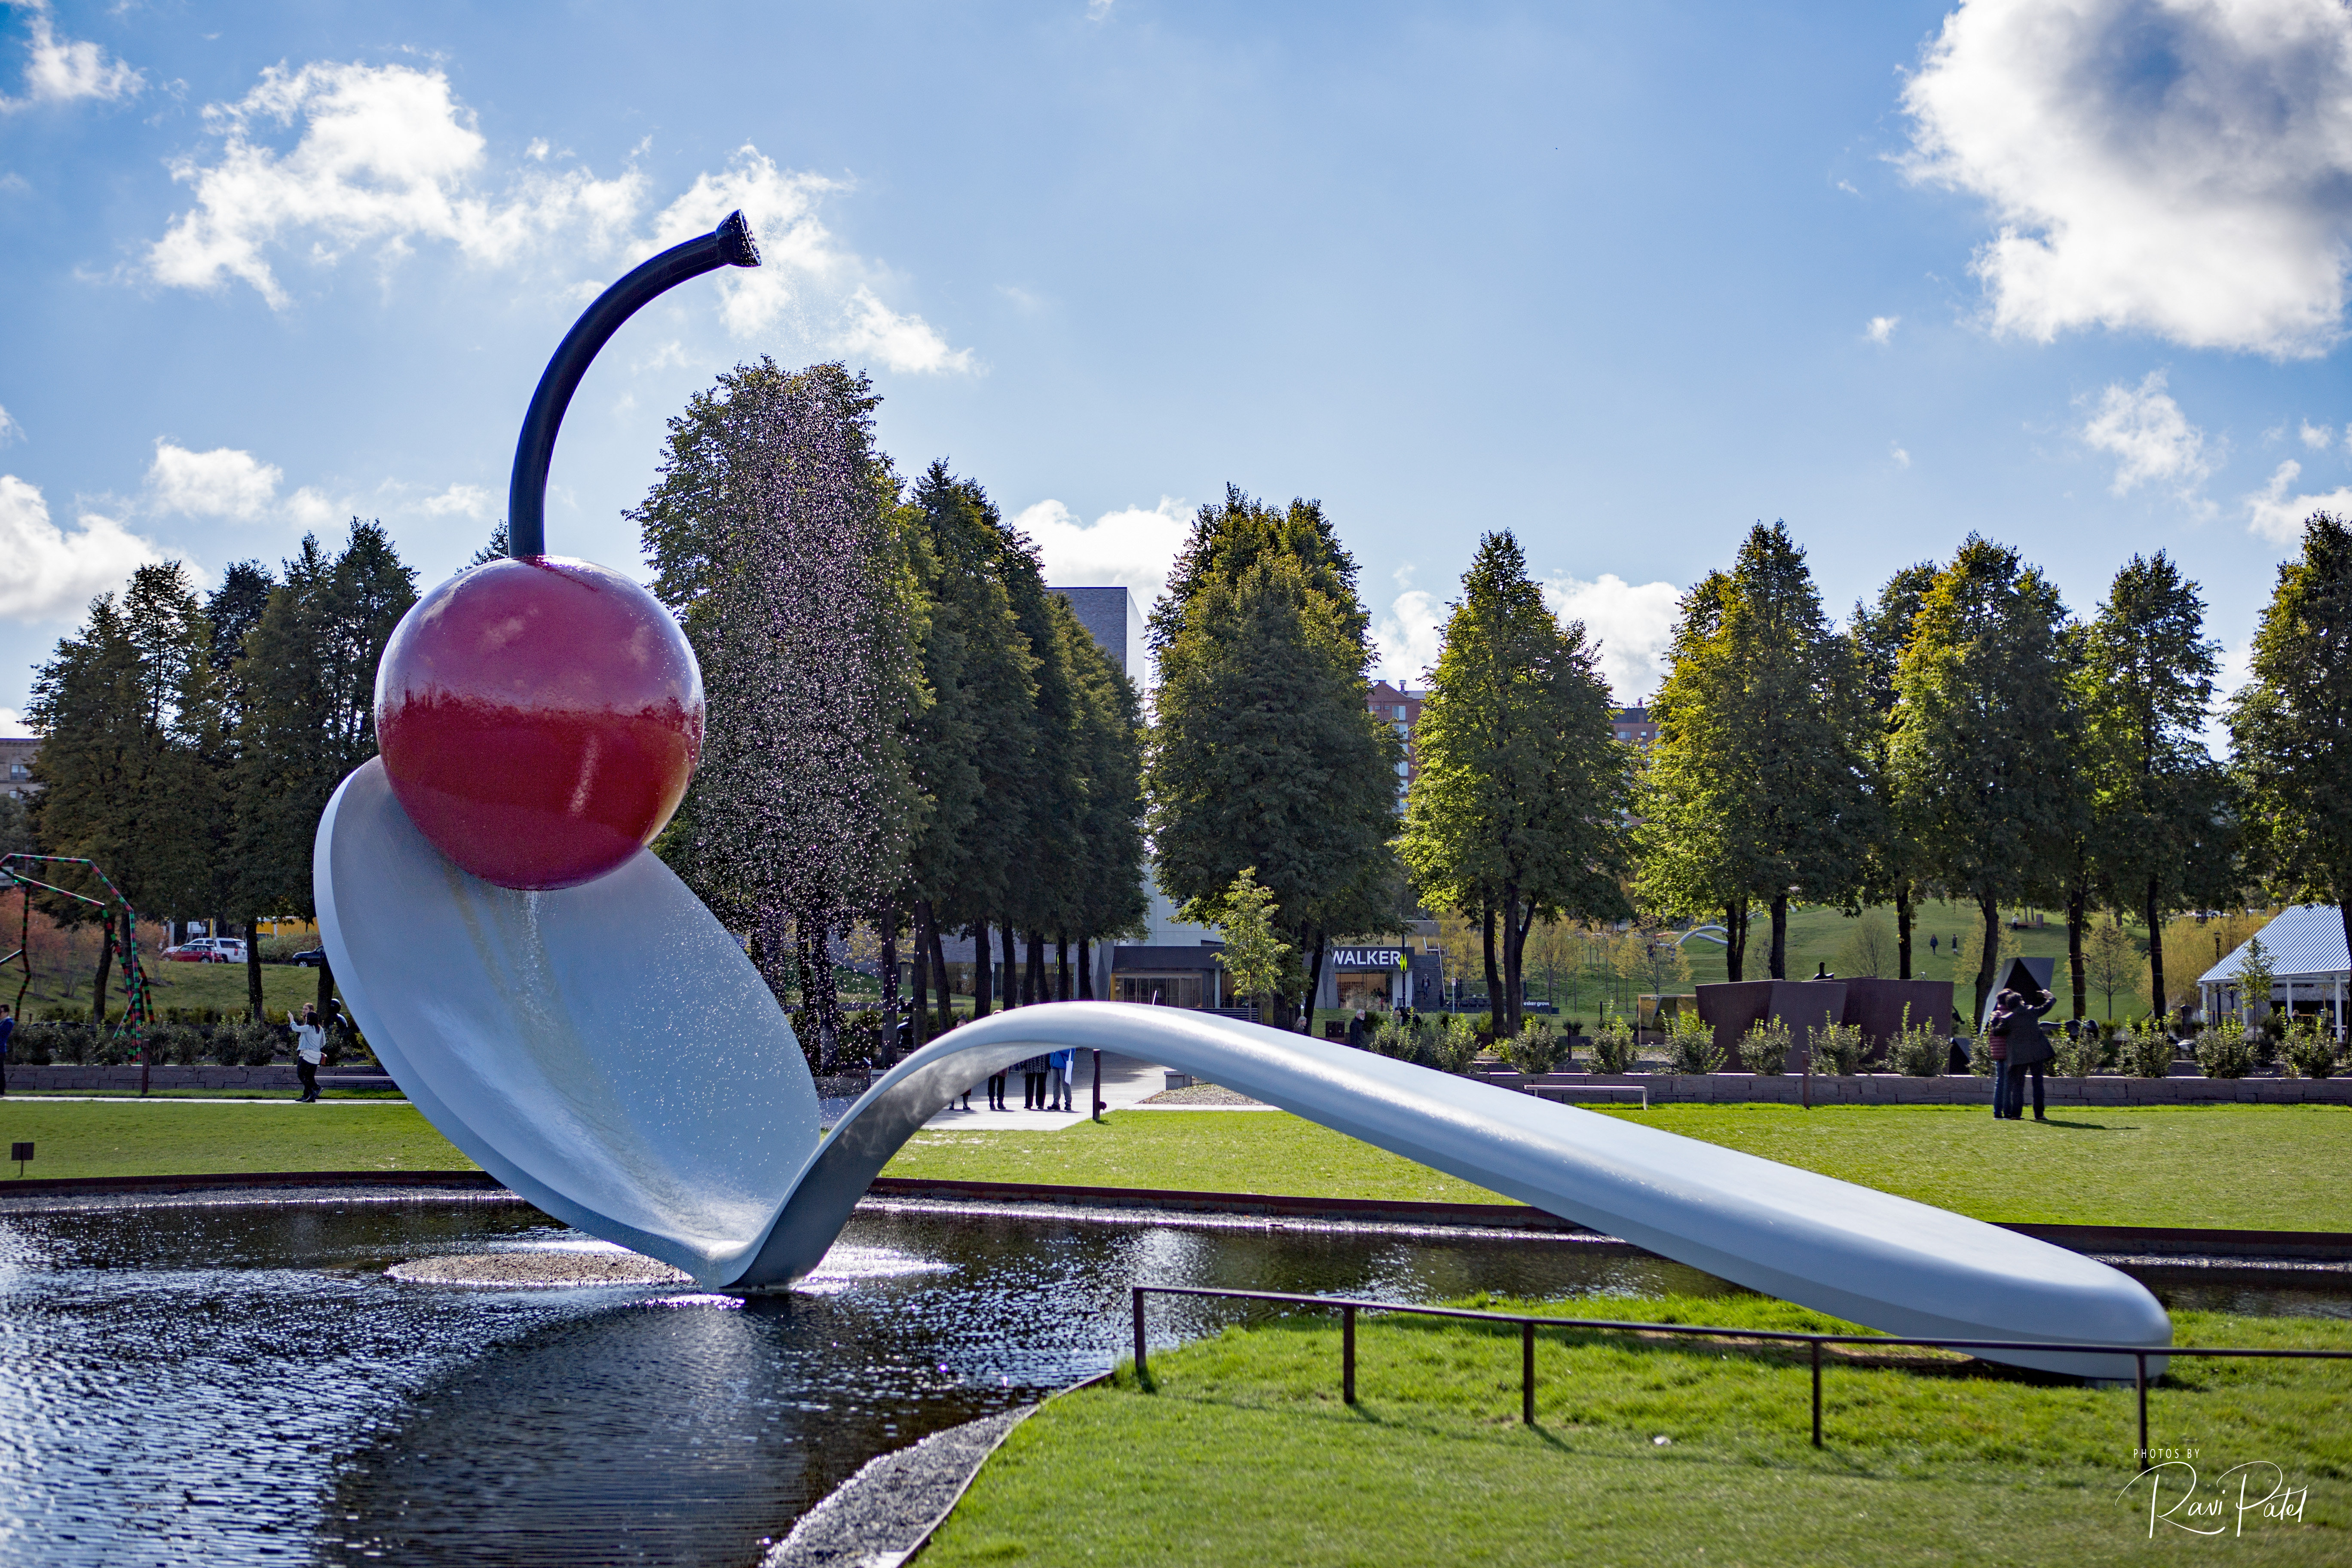 The famous spoonbridge and cherry sculpture is minutes away!